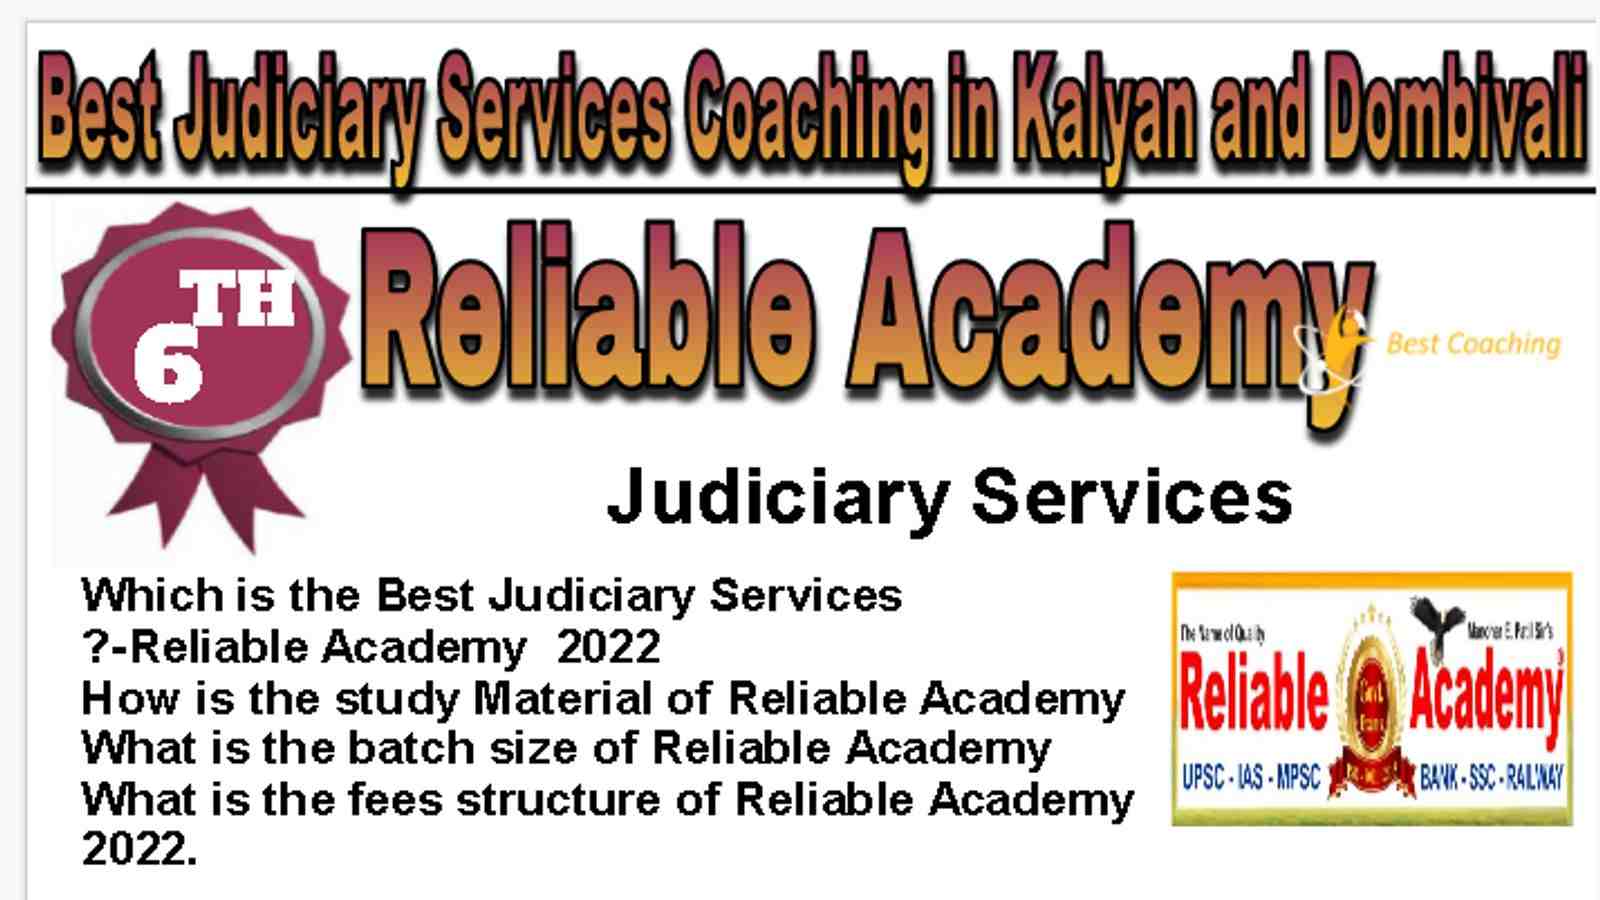 Rank 6 Best Judiciary Services Coaching in Kalyan and Dombivali